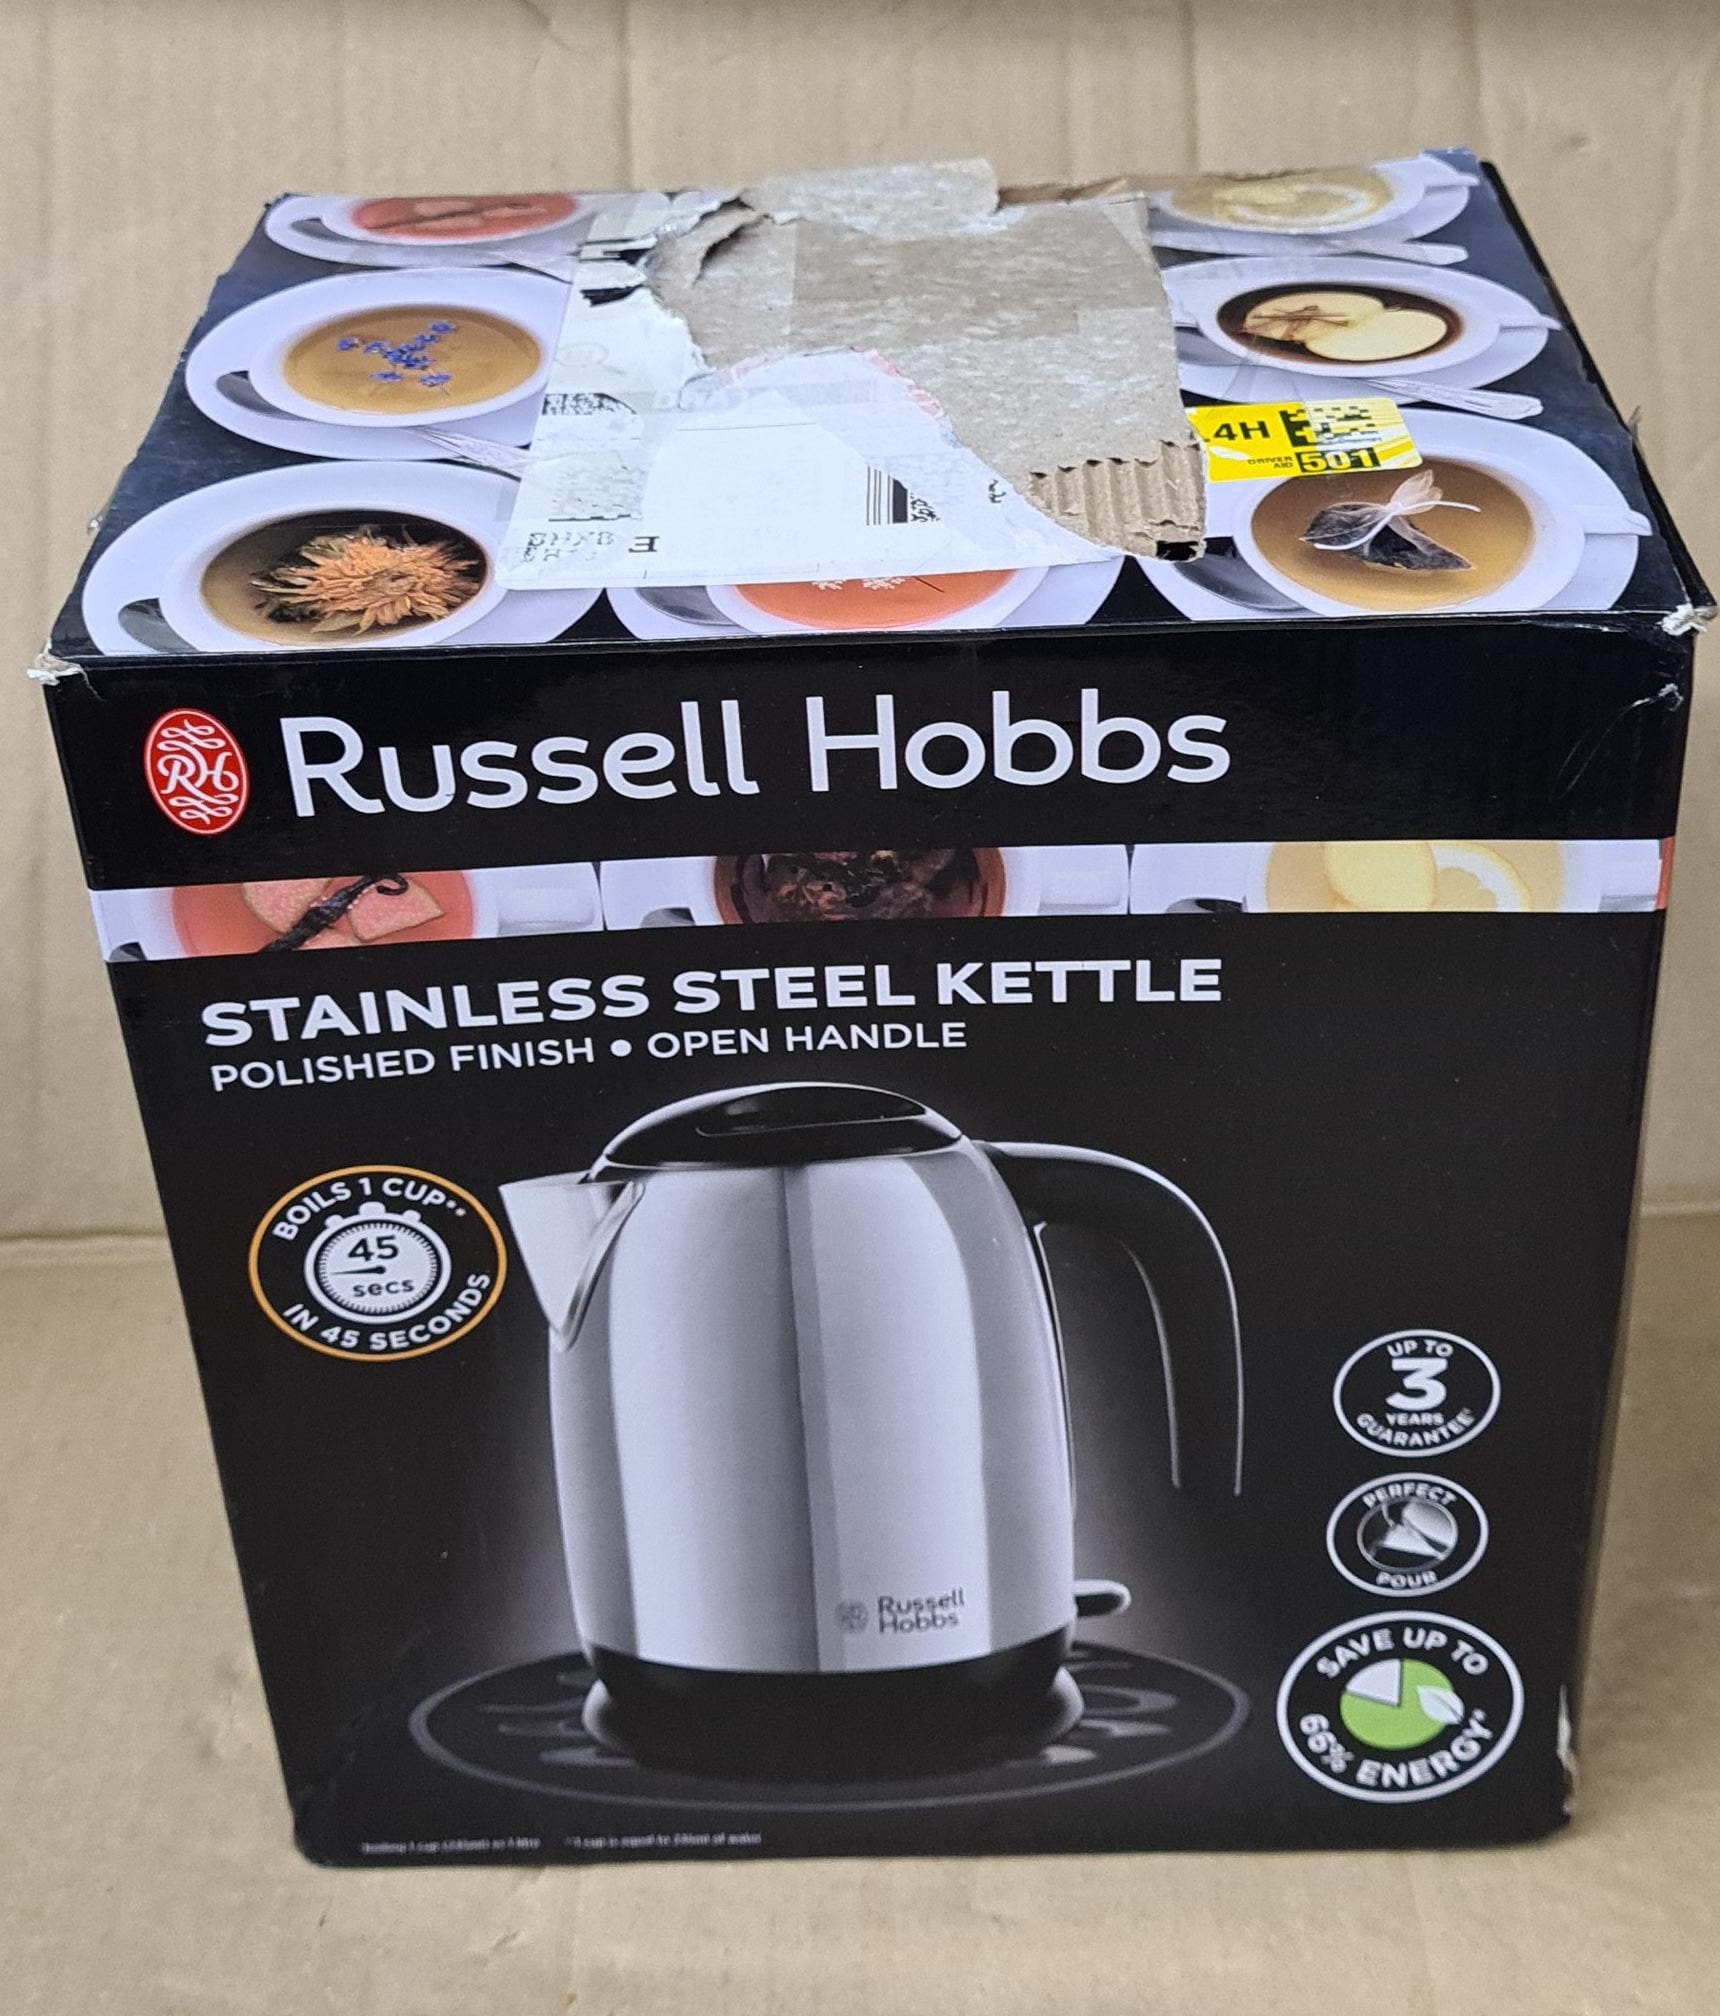 Russell Hobbs Electric Kettle Polished Stainless Steel , 1.7 Litre 23911-4856U